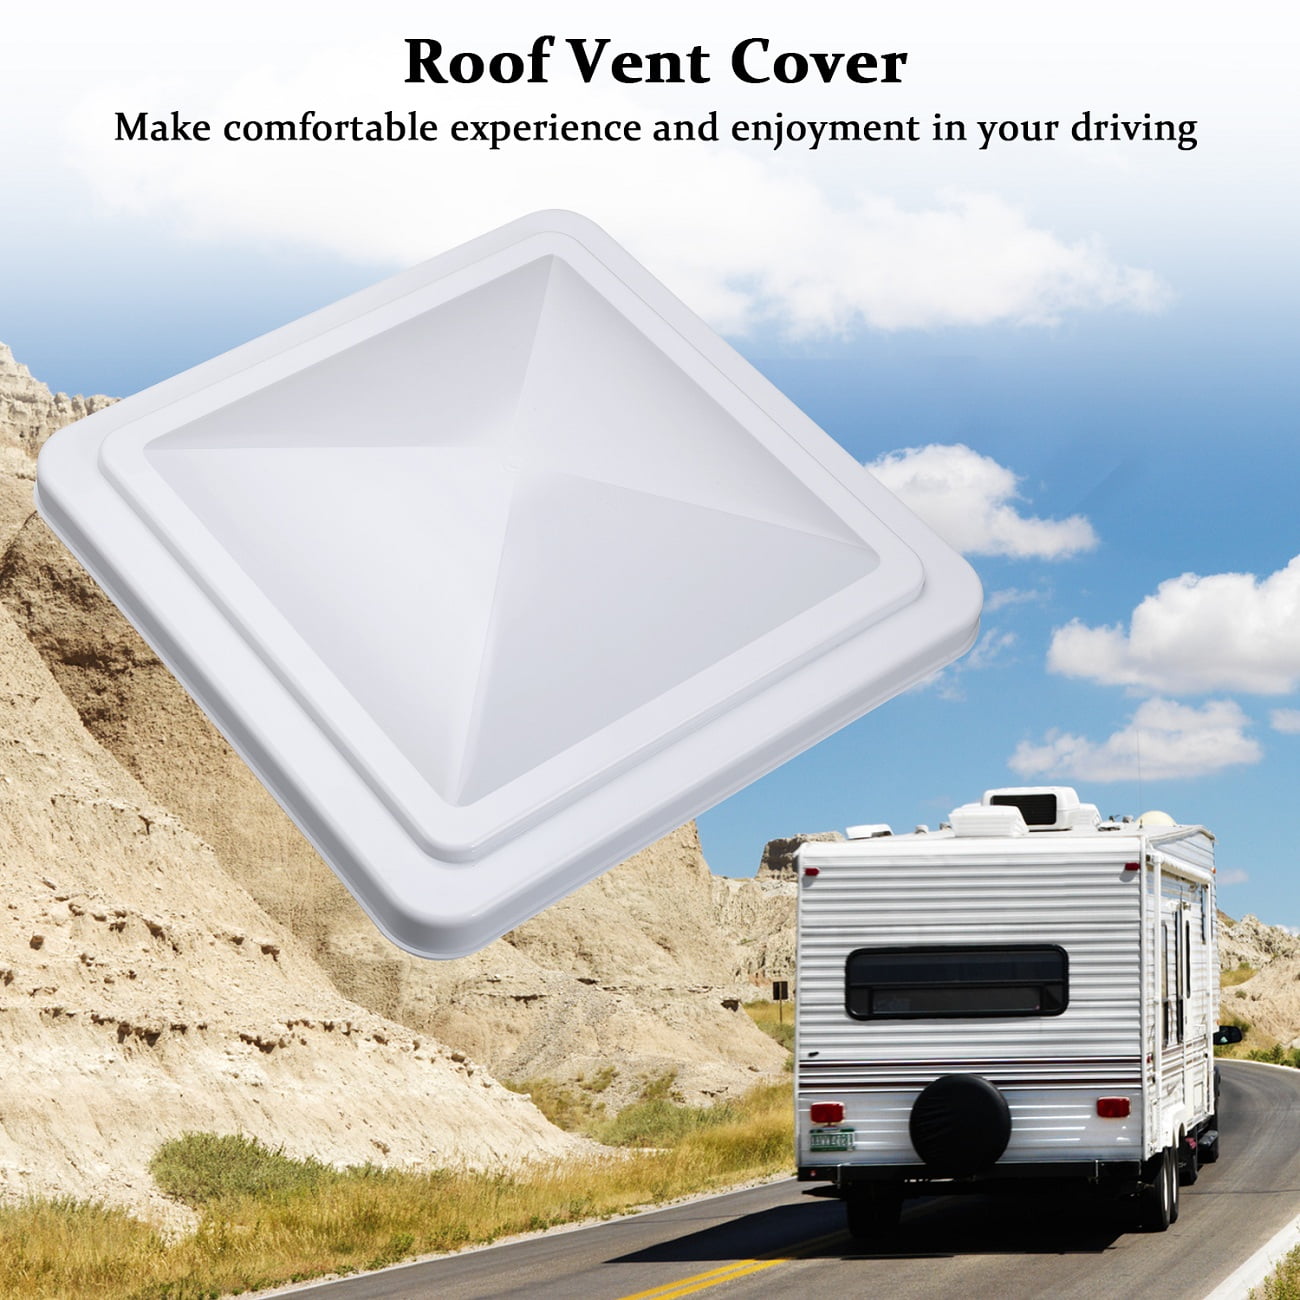 TRIBLE SIX 1pc RV Roof Vent Cover Universal Replacement Lid Ventline for Camper RV Roof Trailer White 14 x 14 